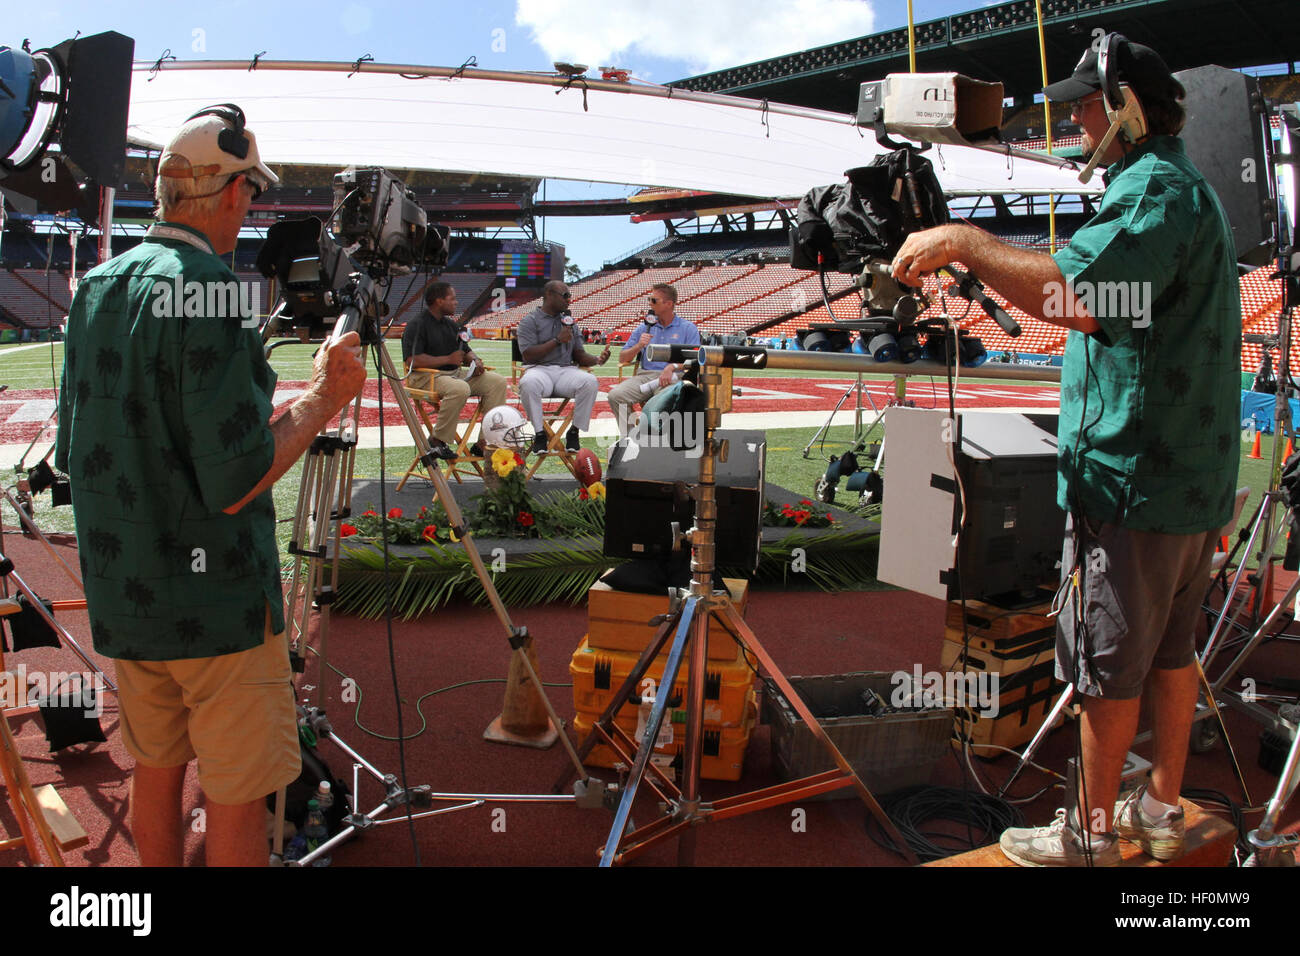 NBC films pregame interviews at the Aloha Stadium during NFL’s 2012 Pro Bowl game in Honolulu, Hawaii, Jan. 29, 2012. Pro Bowl 2012 120129-M-DX861-007 Stock Photo